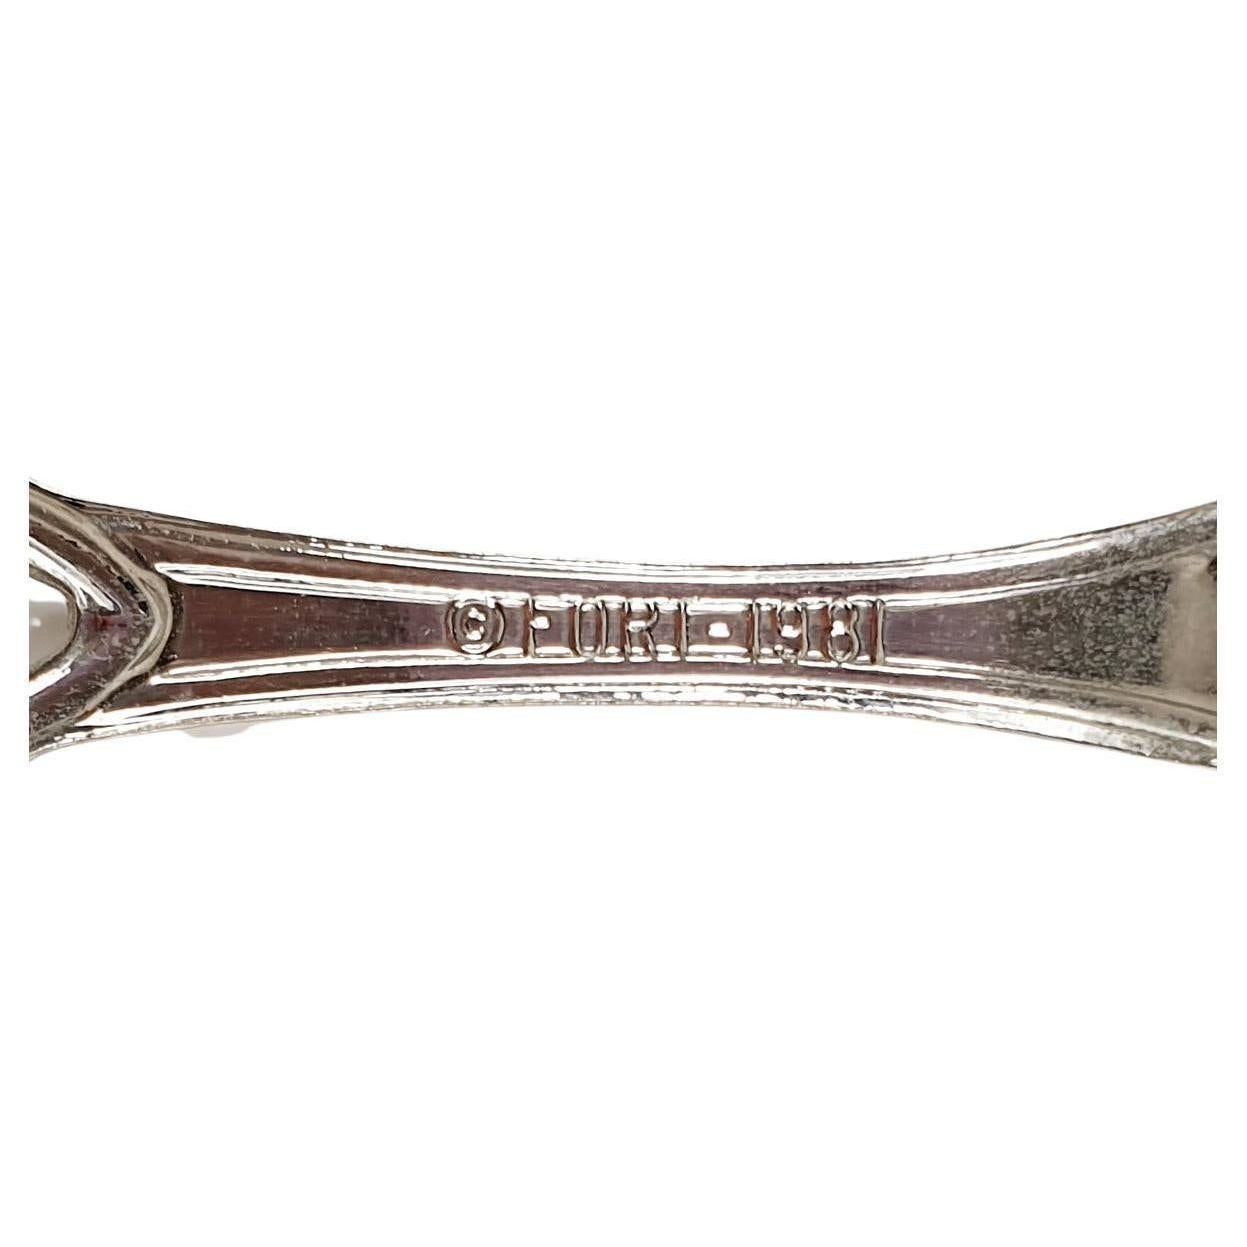 Boston Collection Silver Teaspoon
Length 3.54in / 9cm
Width 0.78in / 2cm
Weight 7.5gr

PRADERA is a  second generation of a family run business jewelers of reference in Spain, with a large track record  being official distributers of prime European